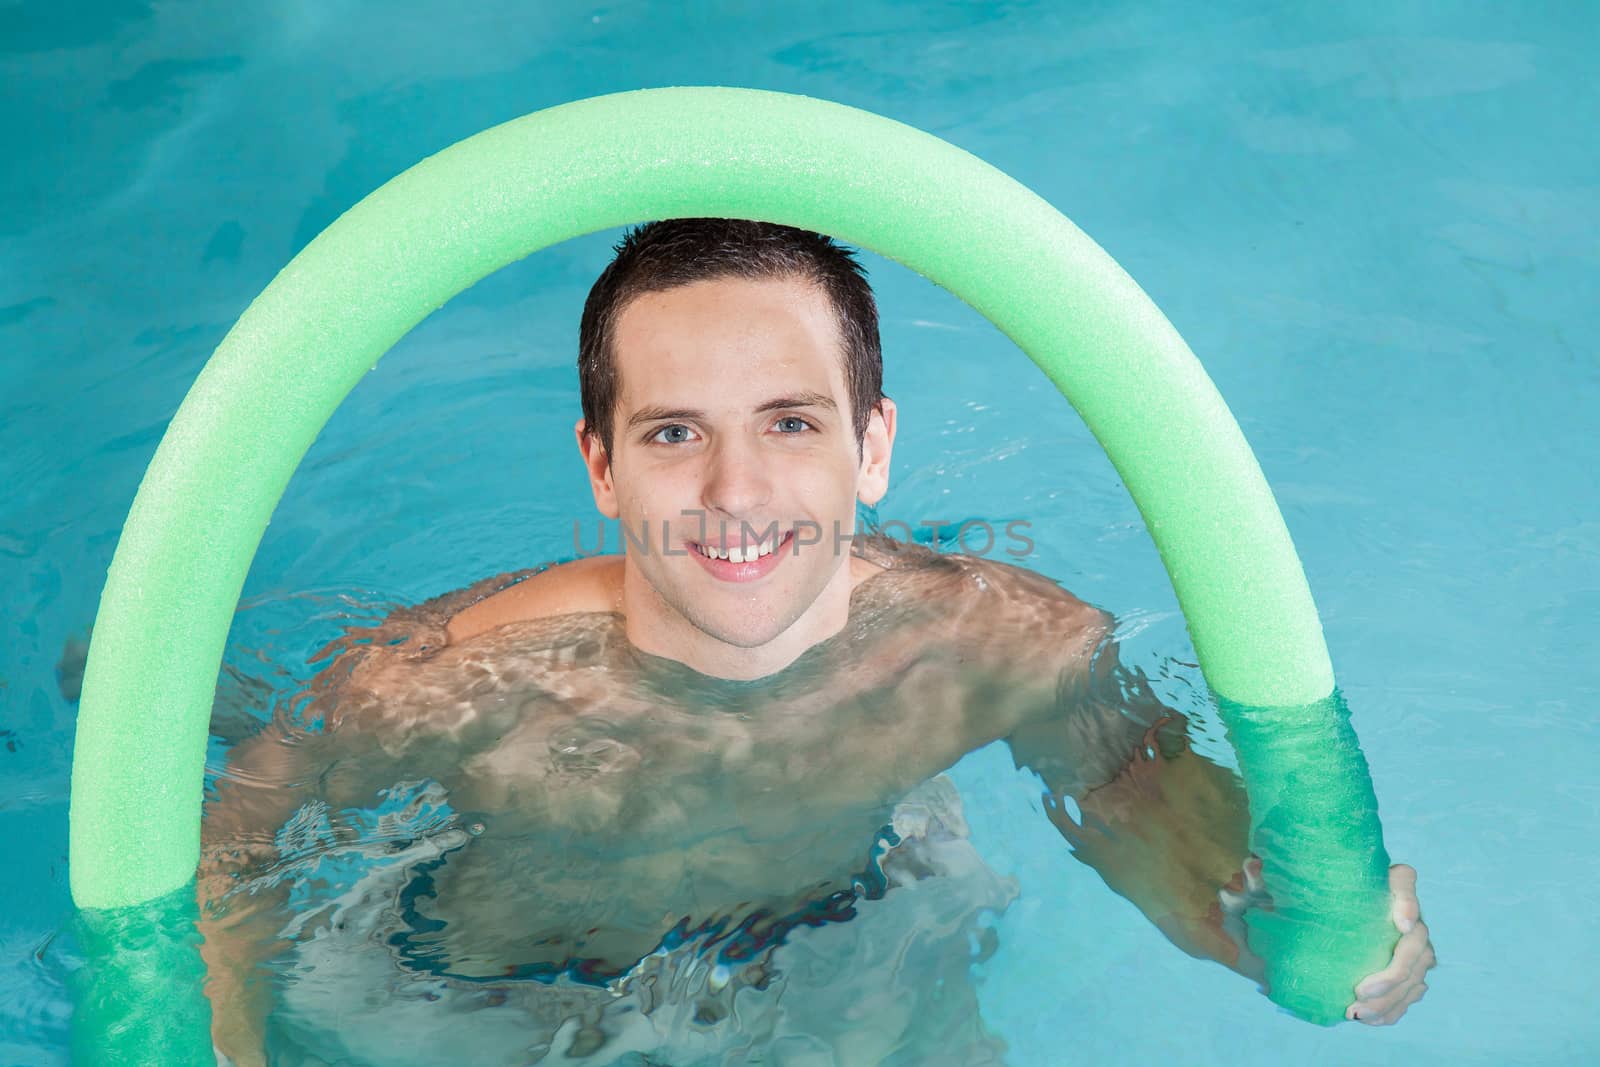 Man playing inside the pool